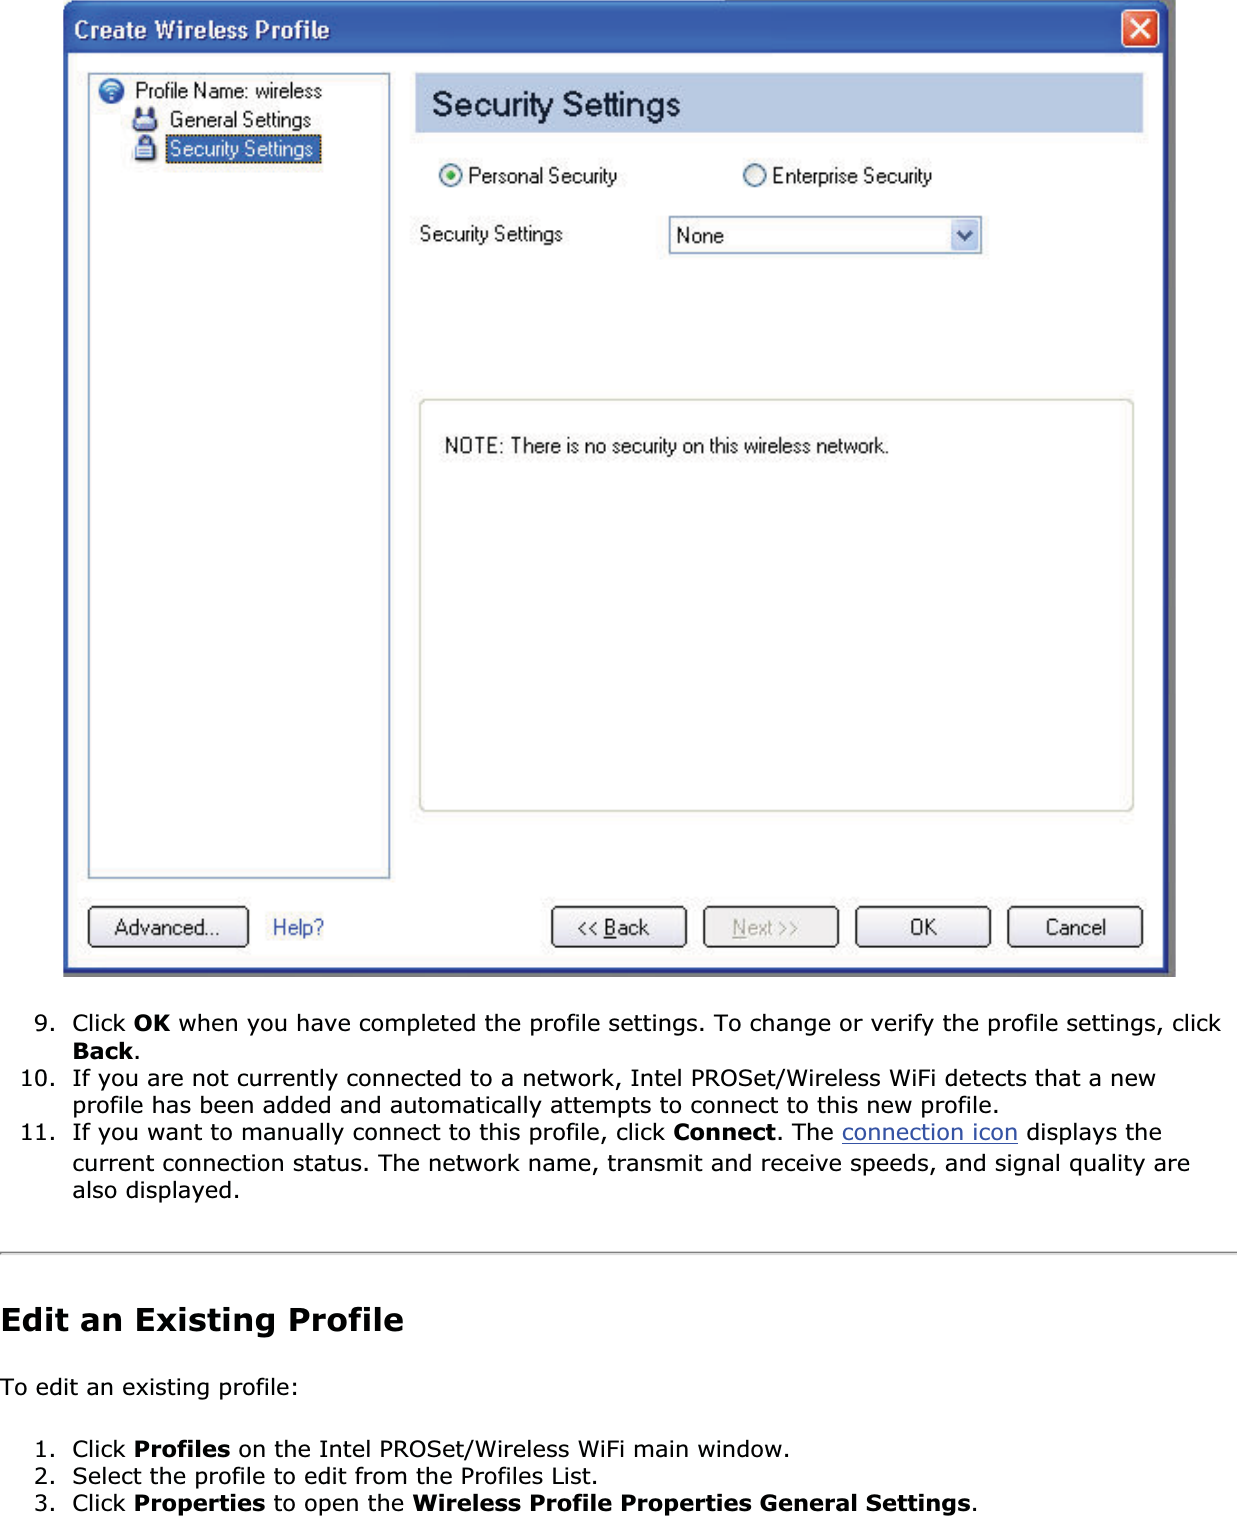 9. Click OK when you have completed the profile settings. To change or verify the profile settings, click Back.10. If you are not currently connected to a network, Intel PROSet/Wireless WiFi detects that a new profile has been added and automatically attempts to connect to this new profile. 11. If you want to manually connect to this profile, click Connect. The connection icon displays the current connection status. The network name, transmit and receive speeds, and signal quality are also displayed.Edit an Existing ProfileTo edit an existing profile: 1. Click Profiles on the Intel PROSet/Wireless WiFi main window.2. Select the profile to edit from the Profiles List. 3. Click Properties to open the Wireless Profile Properties General Settings.